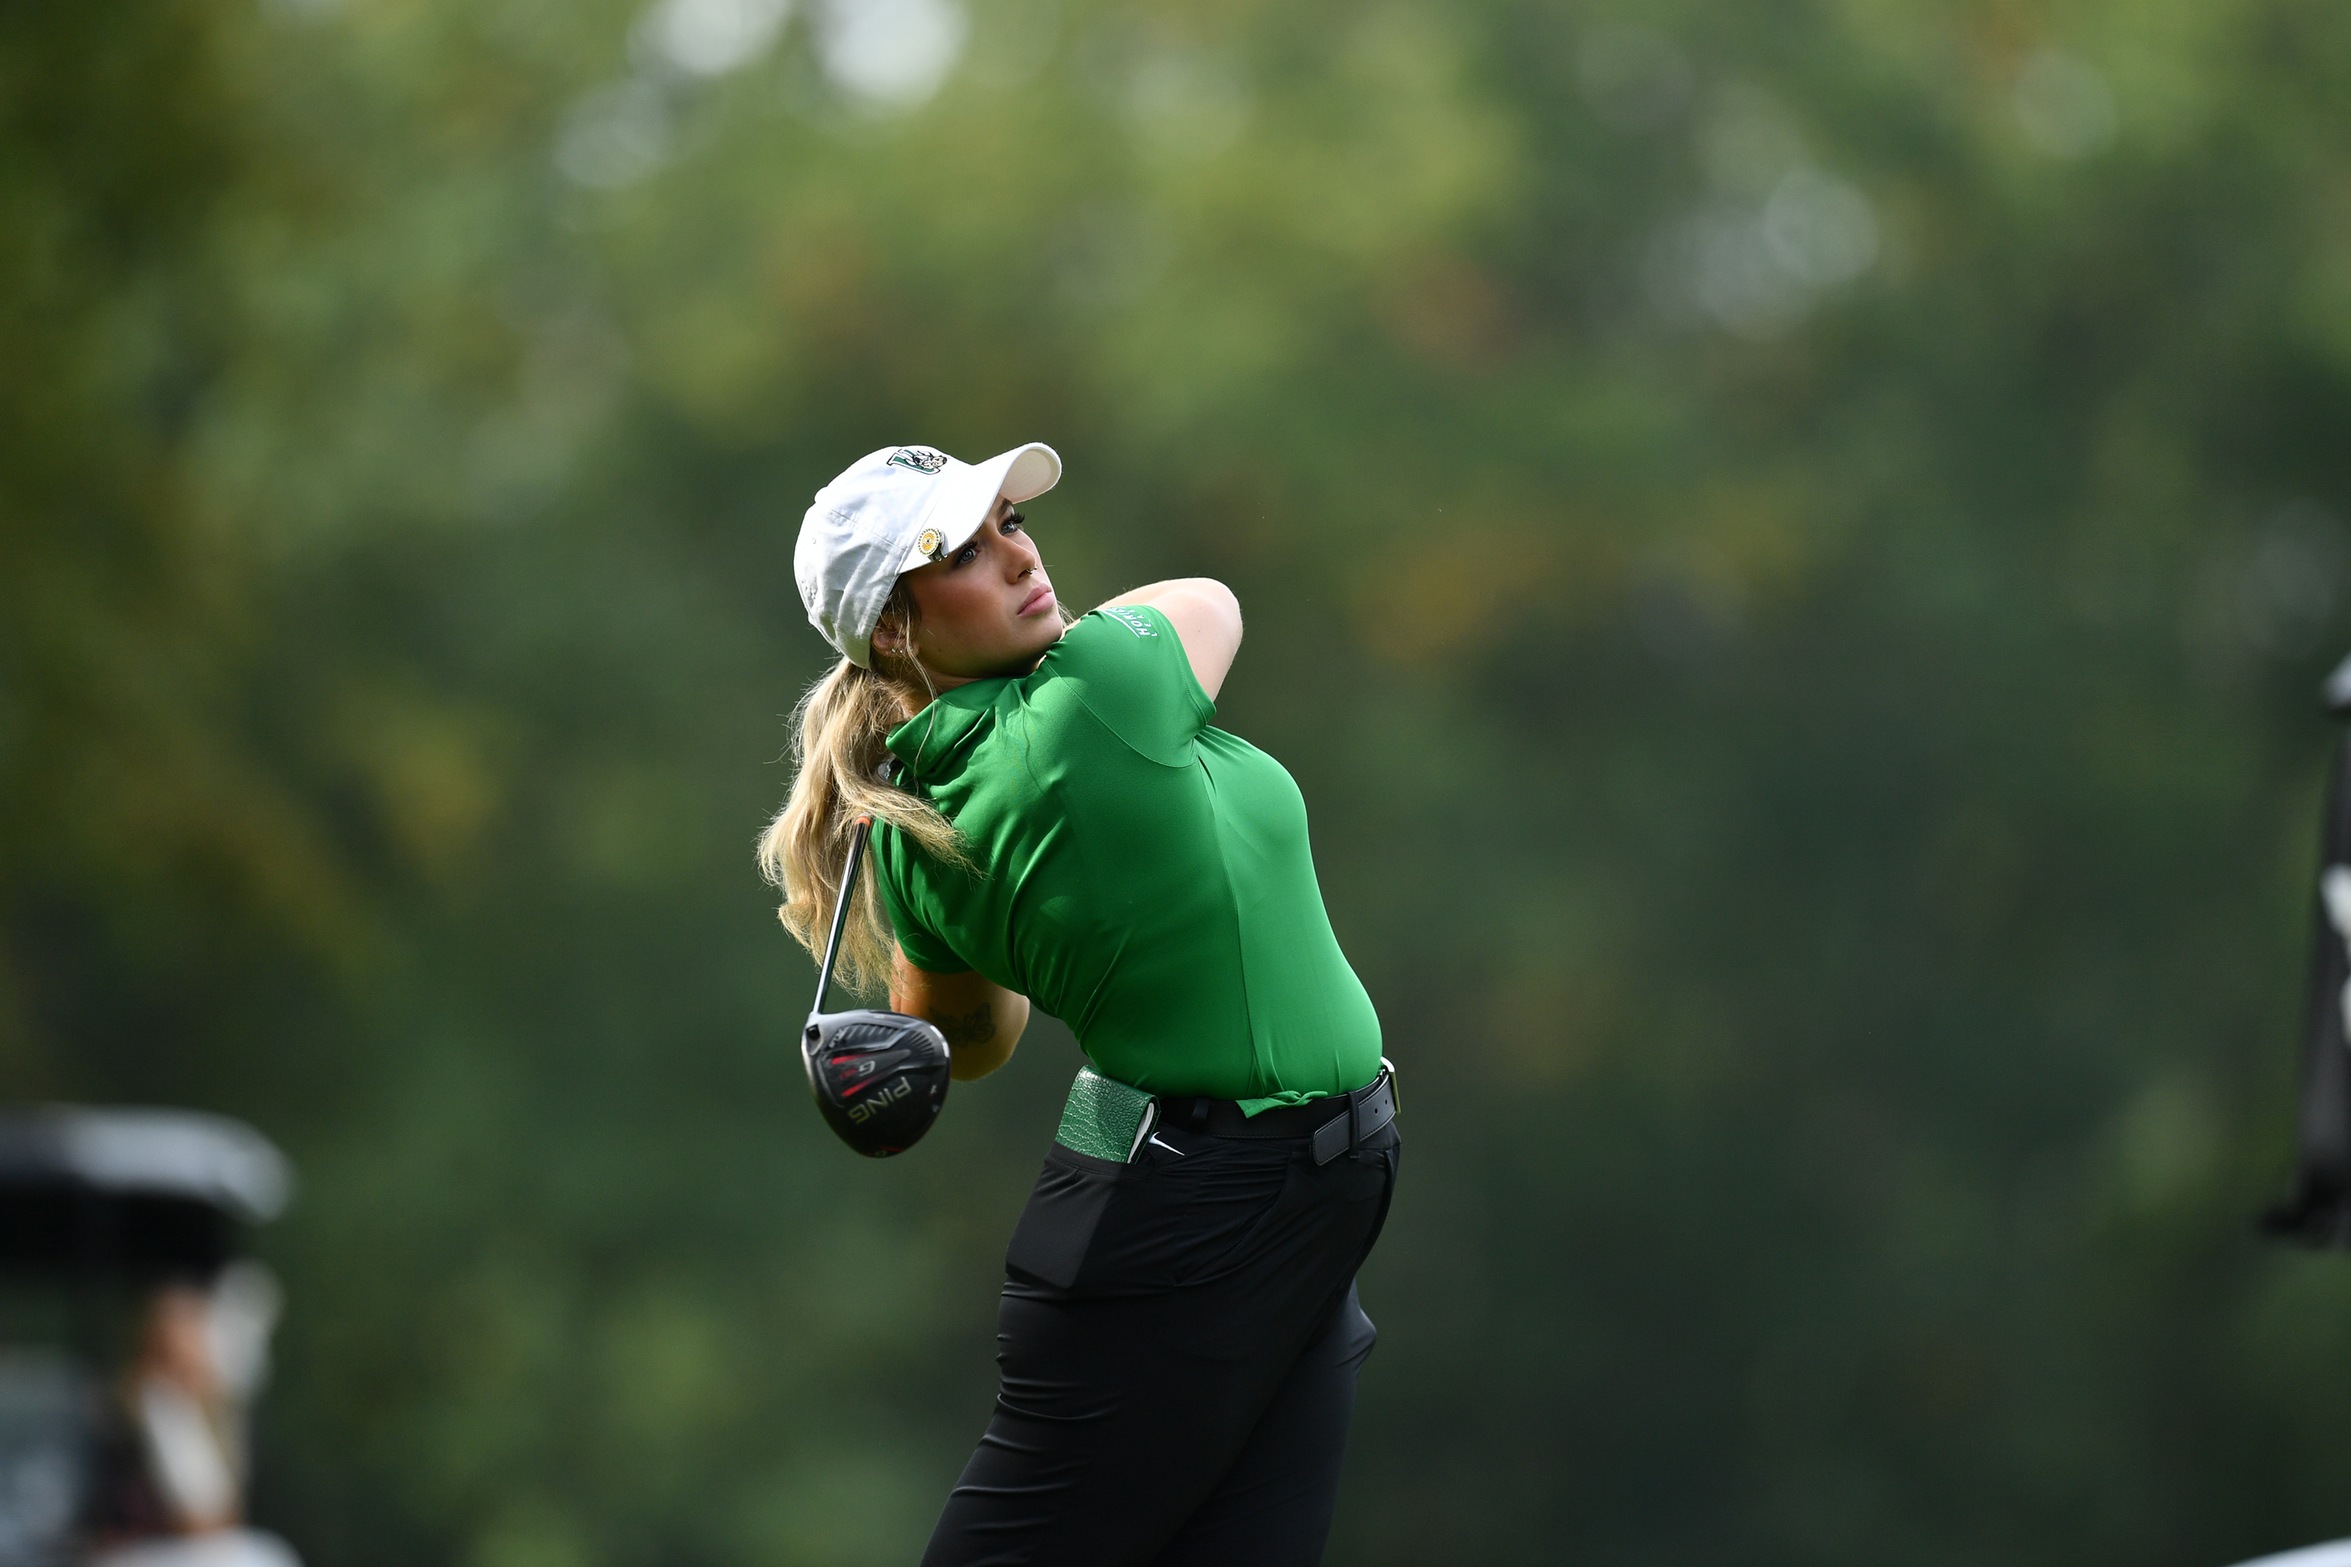 Cleveland State Women’s Golf Closes Fall Season With Ninth Place Finish at Dayton Flyer Invitational